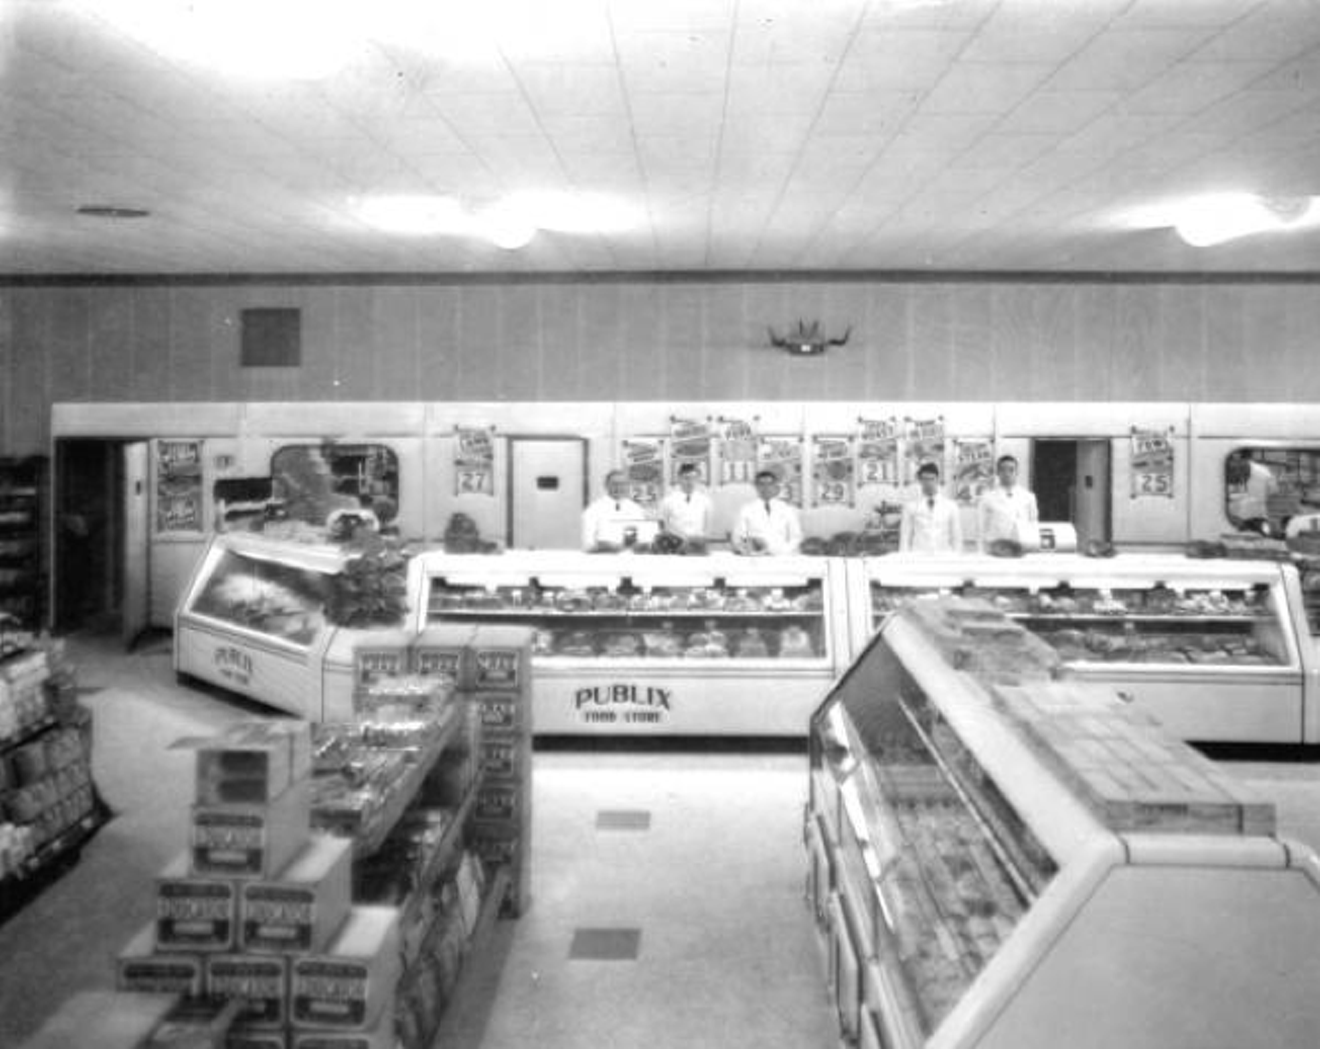 Inside the nation's first Publix grocery store.